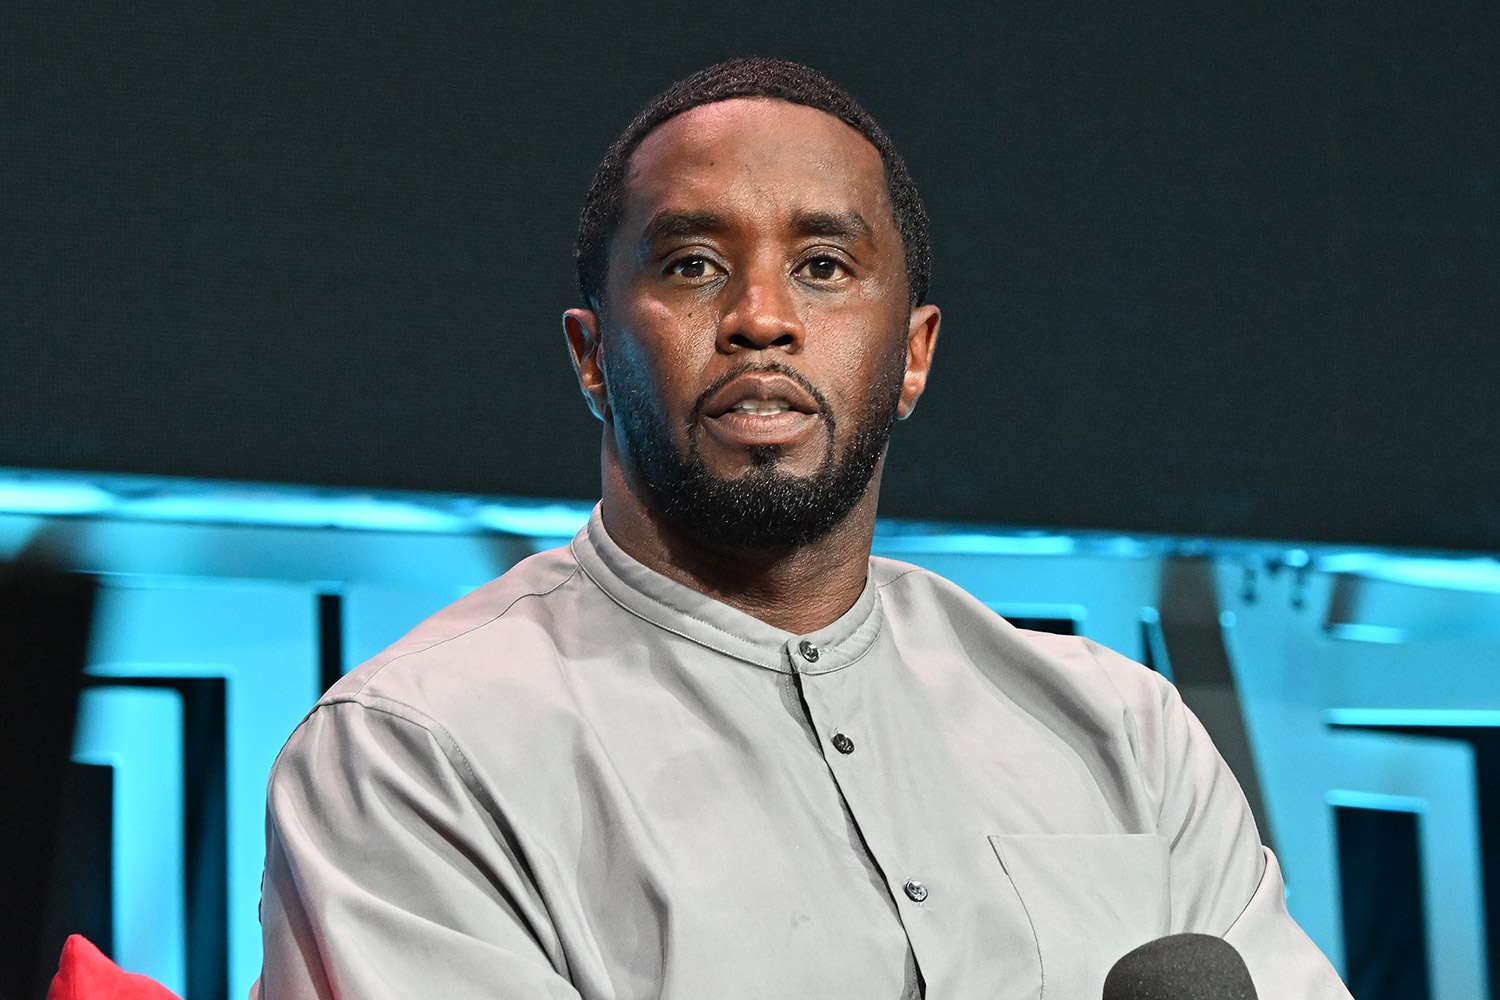 What are the major allegations against rapper Sean 'Diddy' Combs?